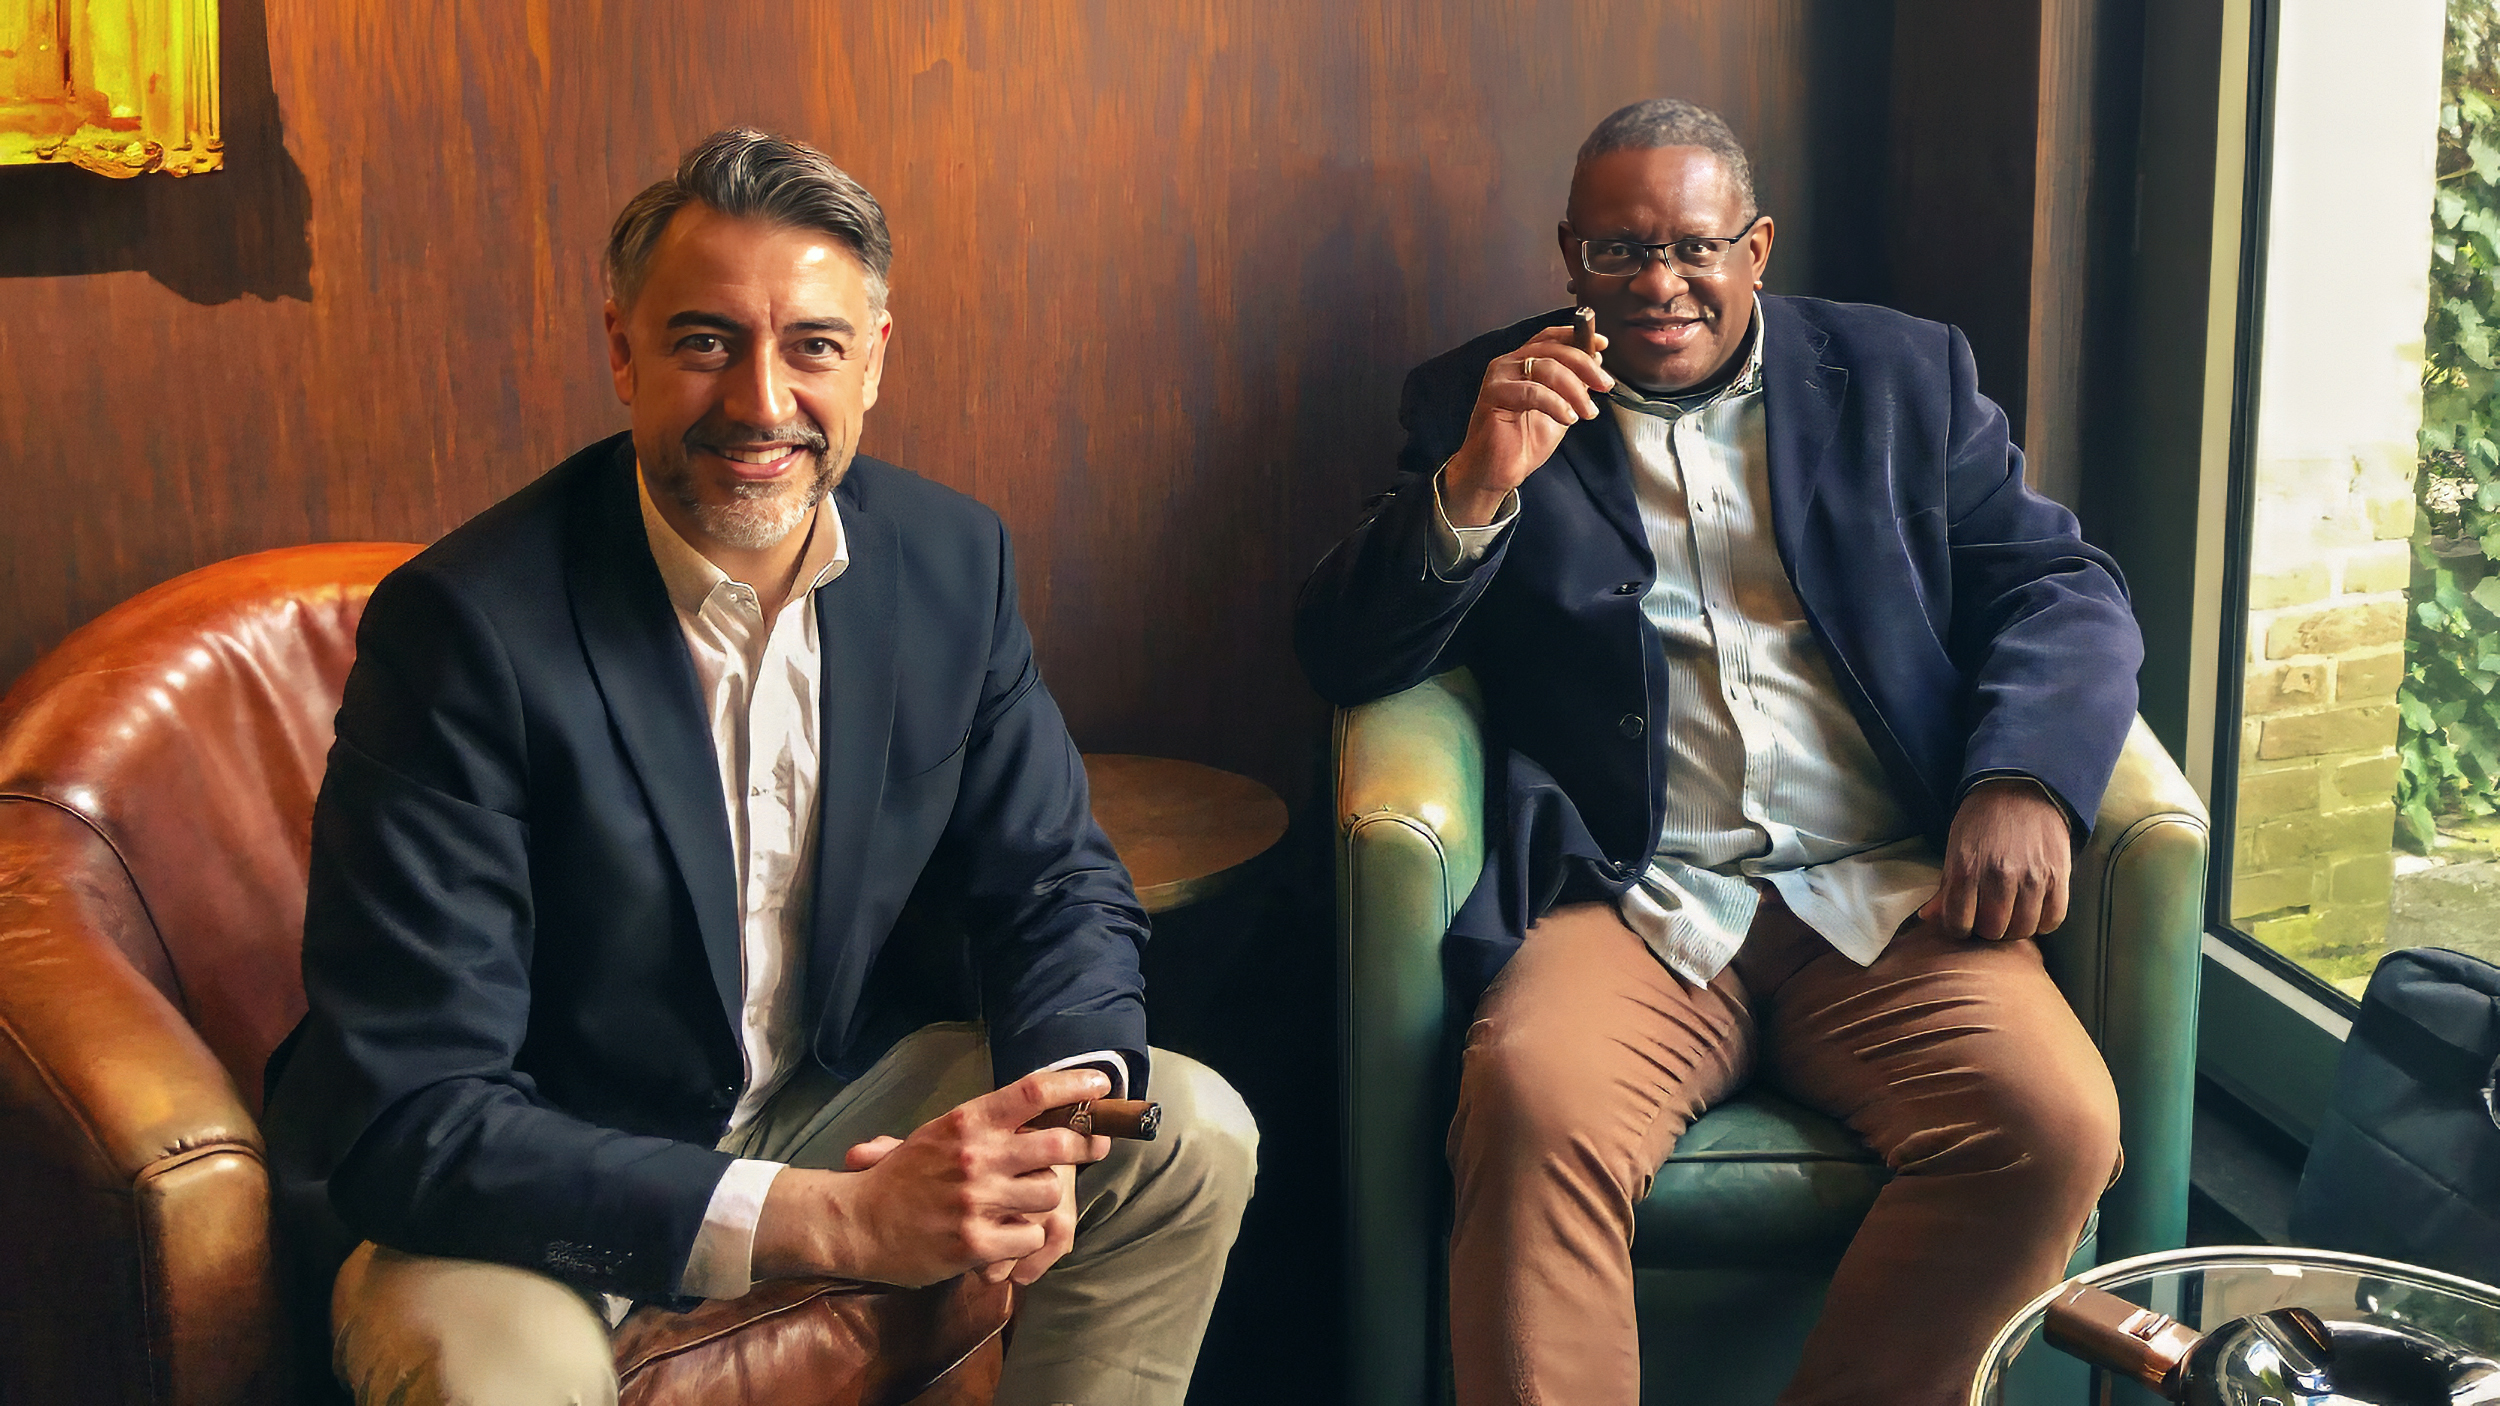 The Business of Cigars: An Interview with Rodrigo and Nestor